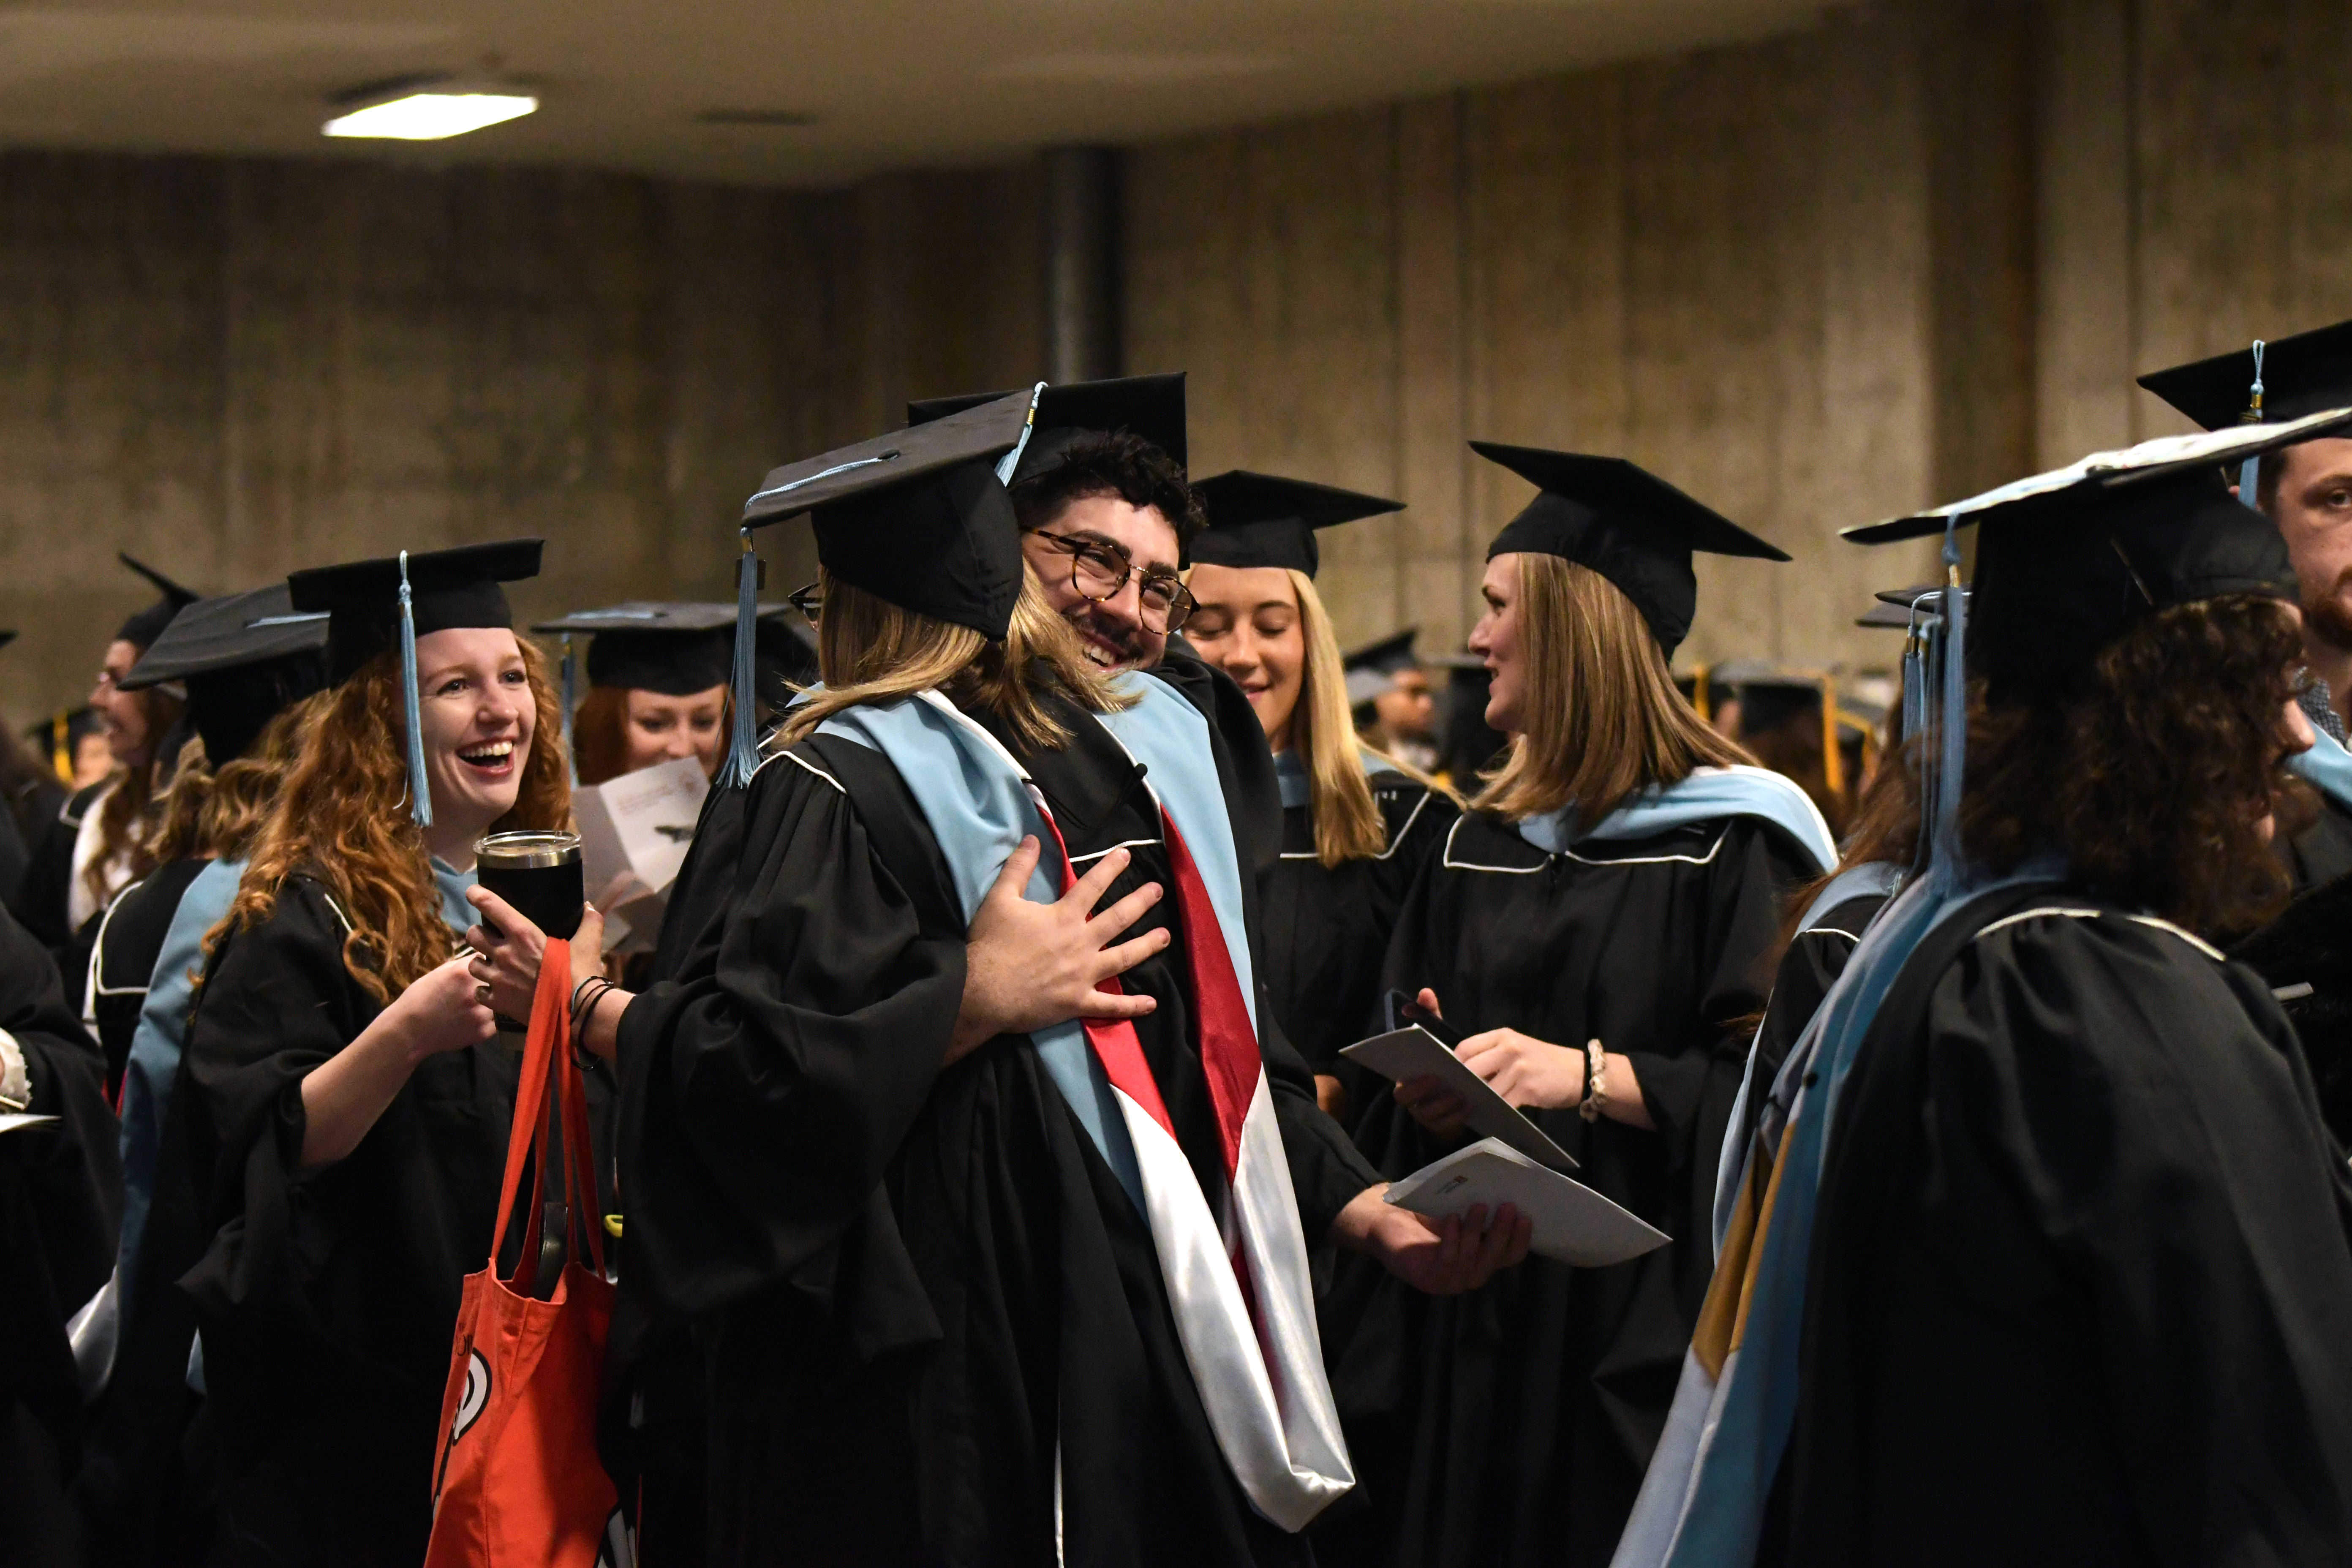 graduates embrace in the staging area